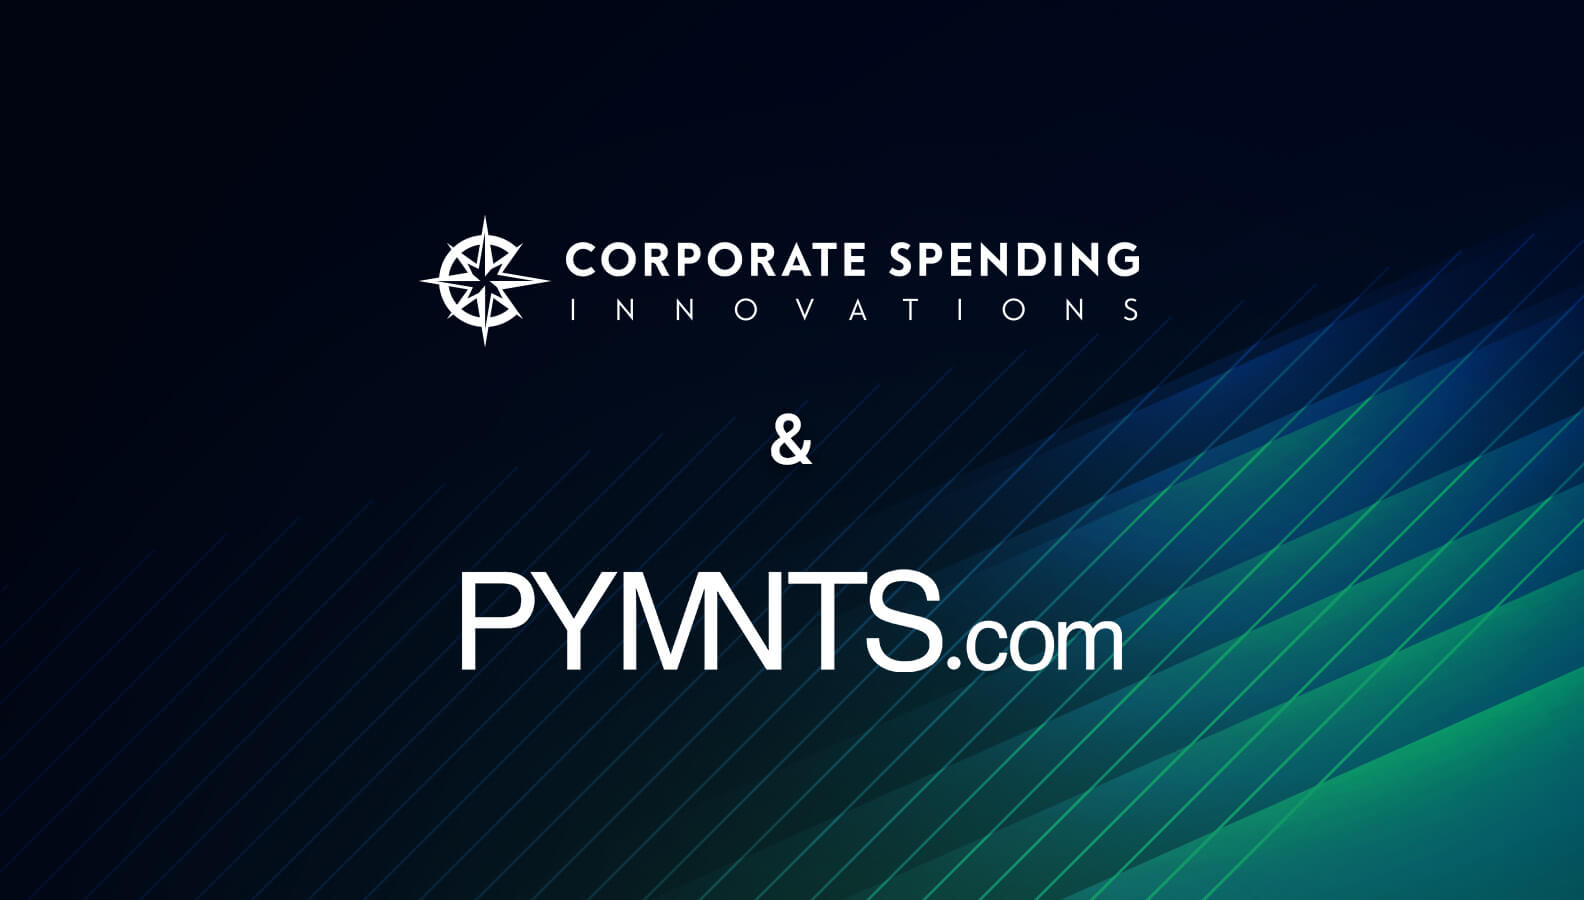 Join CSI and PYMNTS.com for a Roundtable Discussion